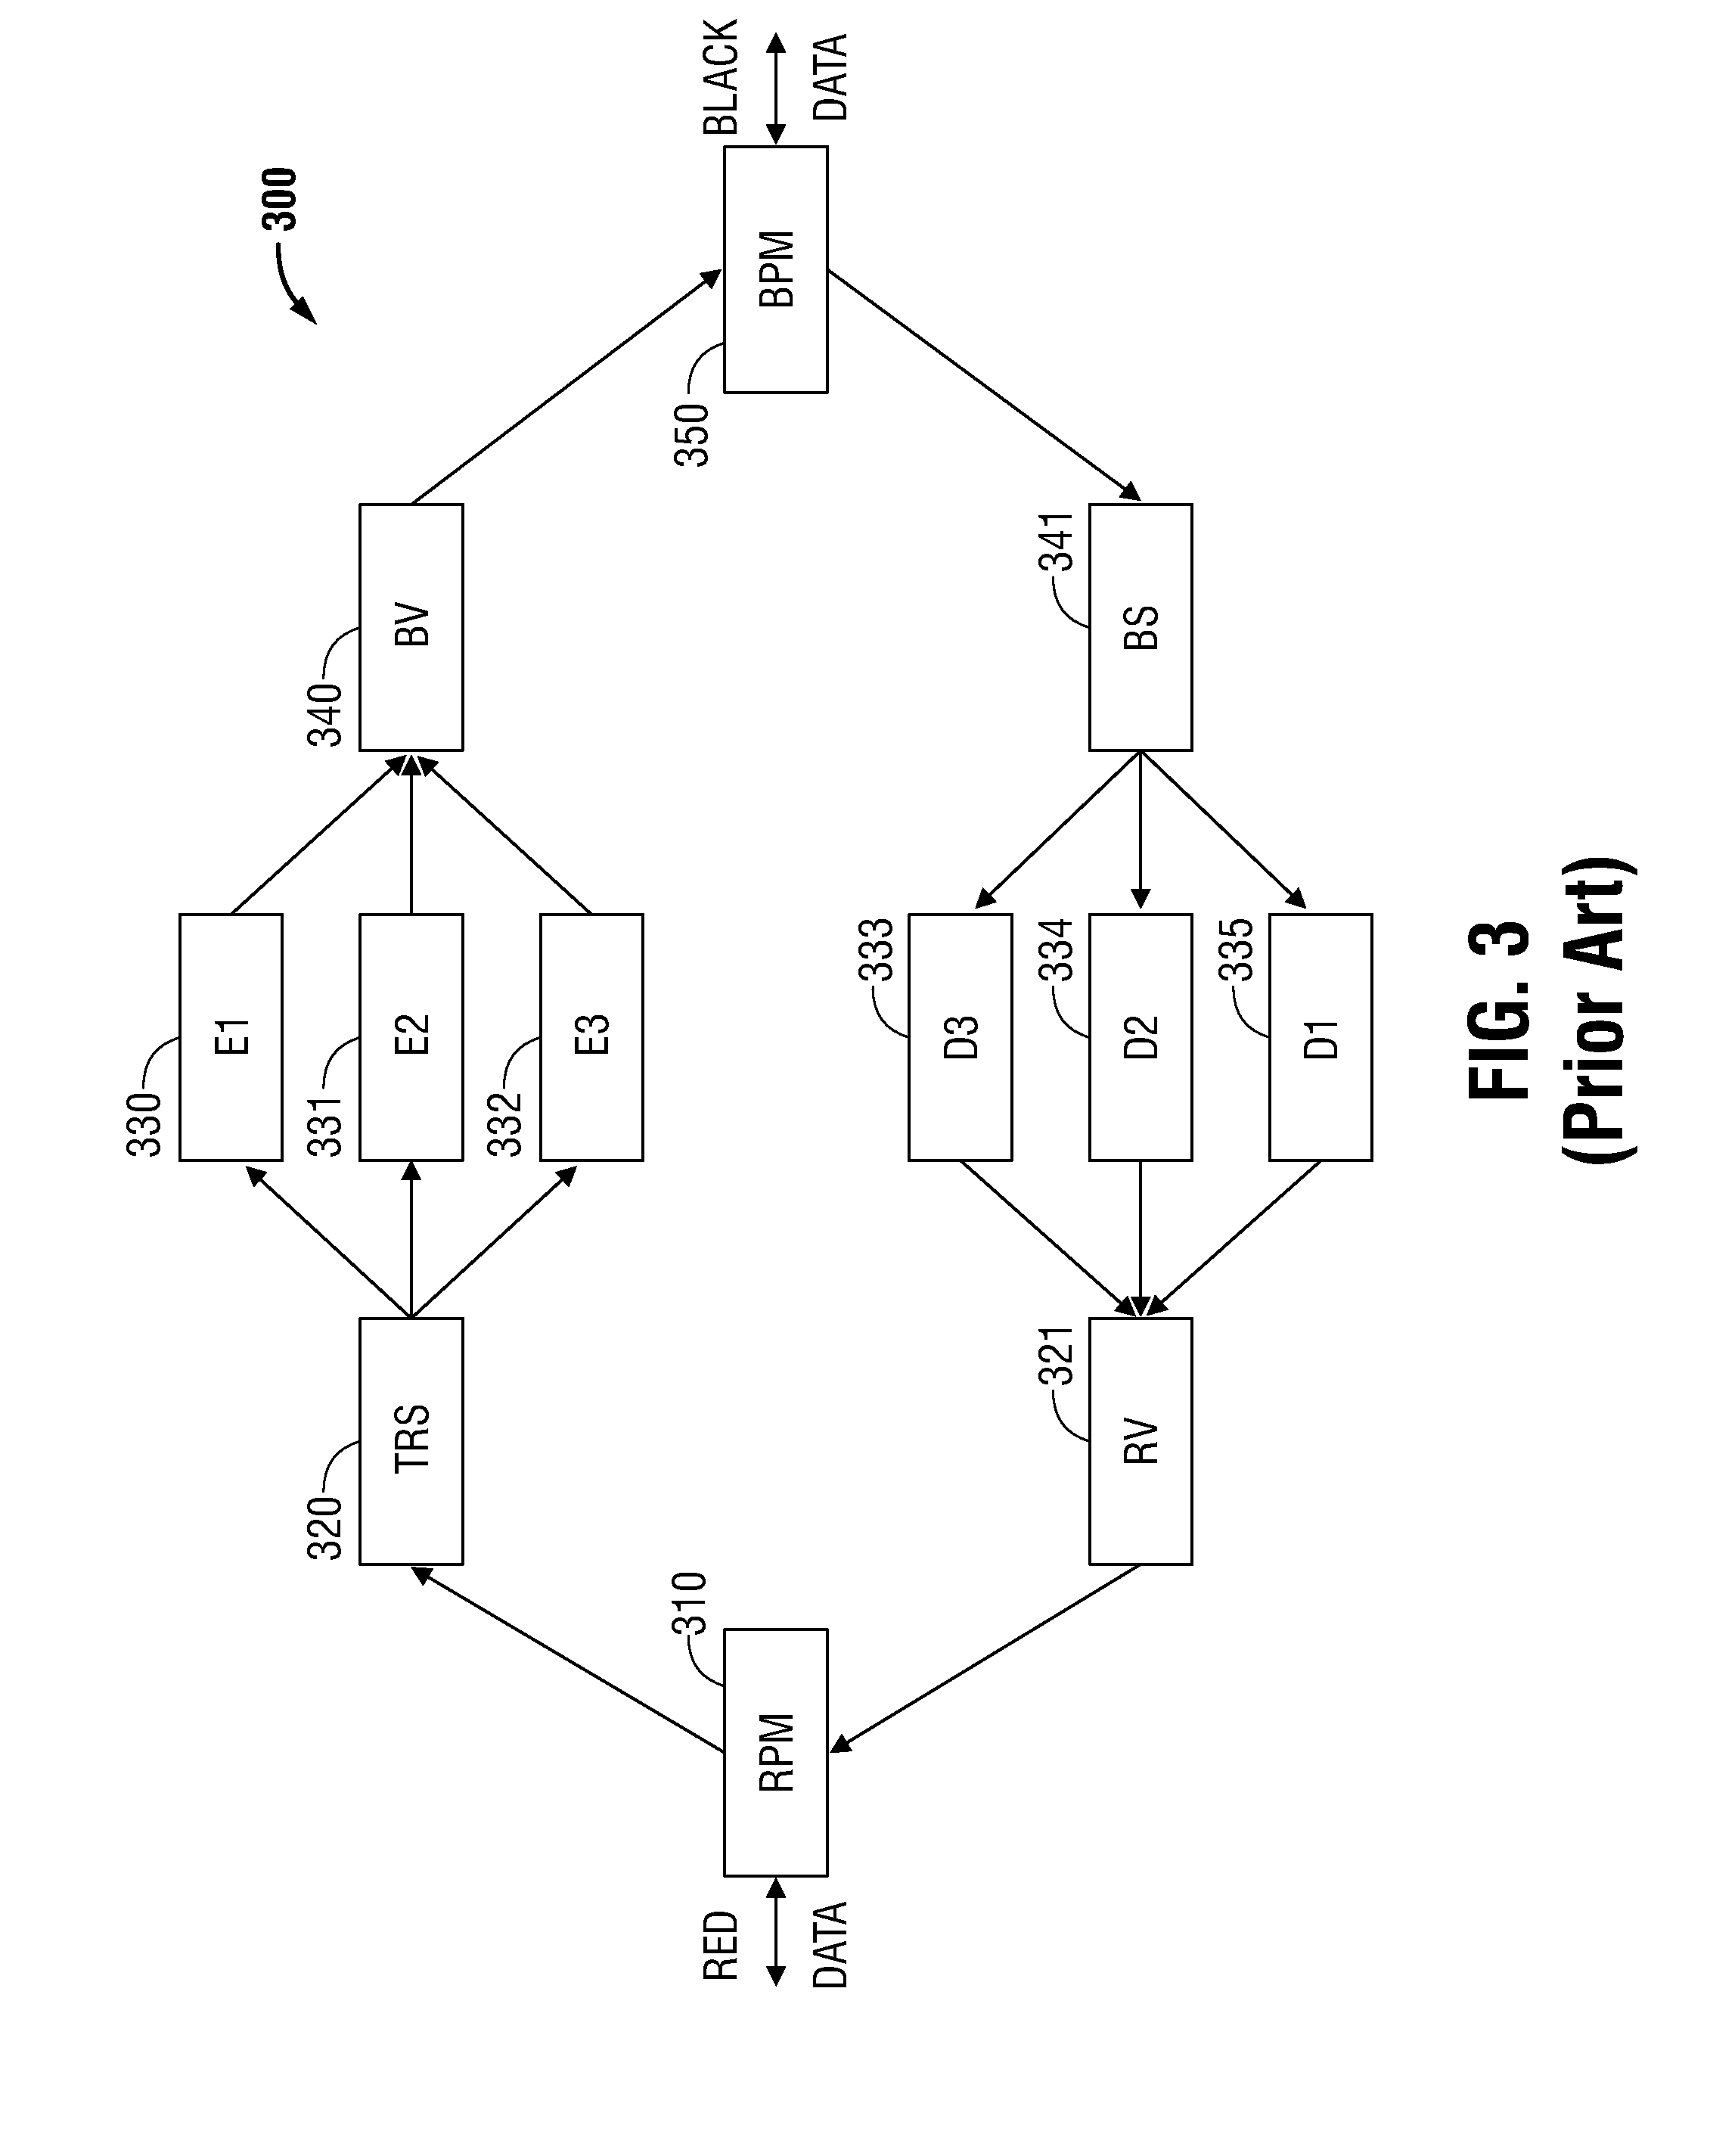 Multi-level security system for enabling secure file sharing across multiple security levels and method thereof